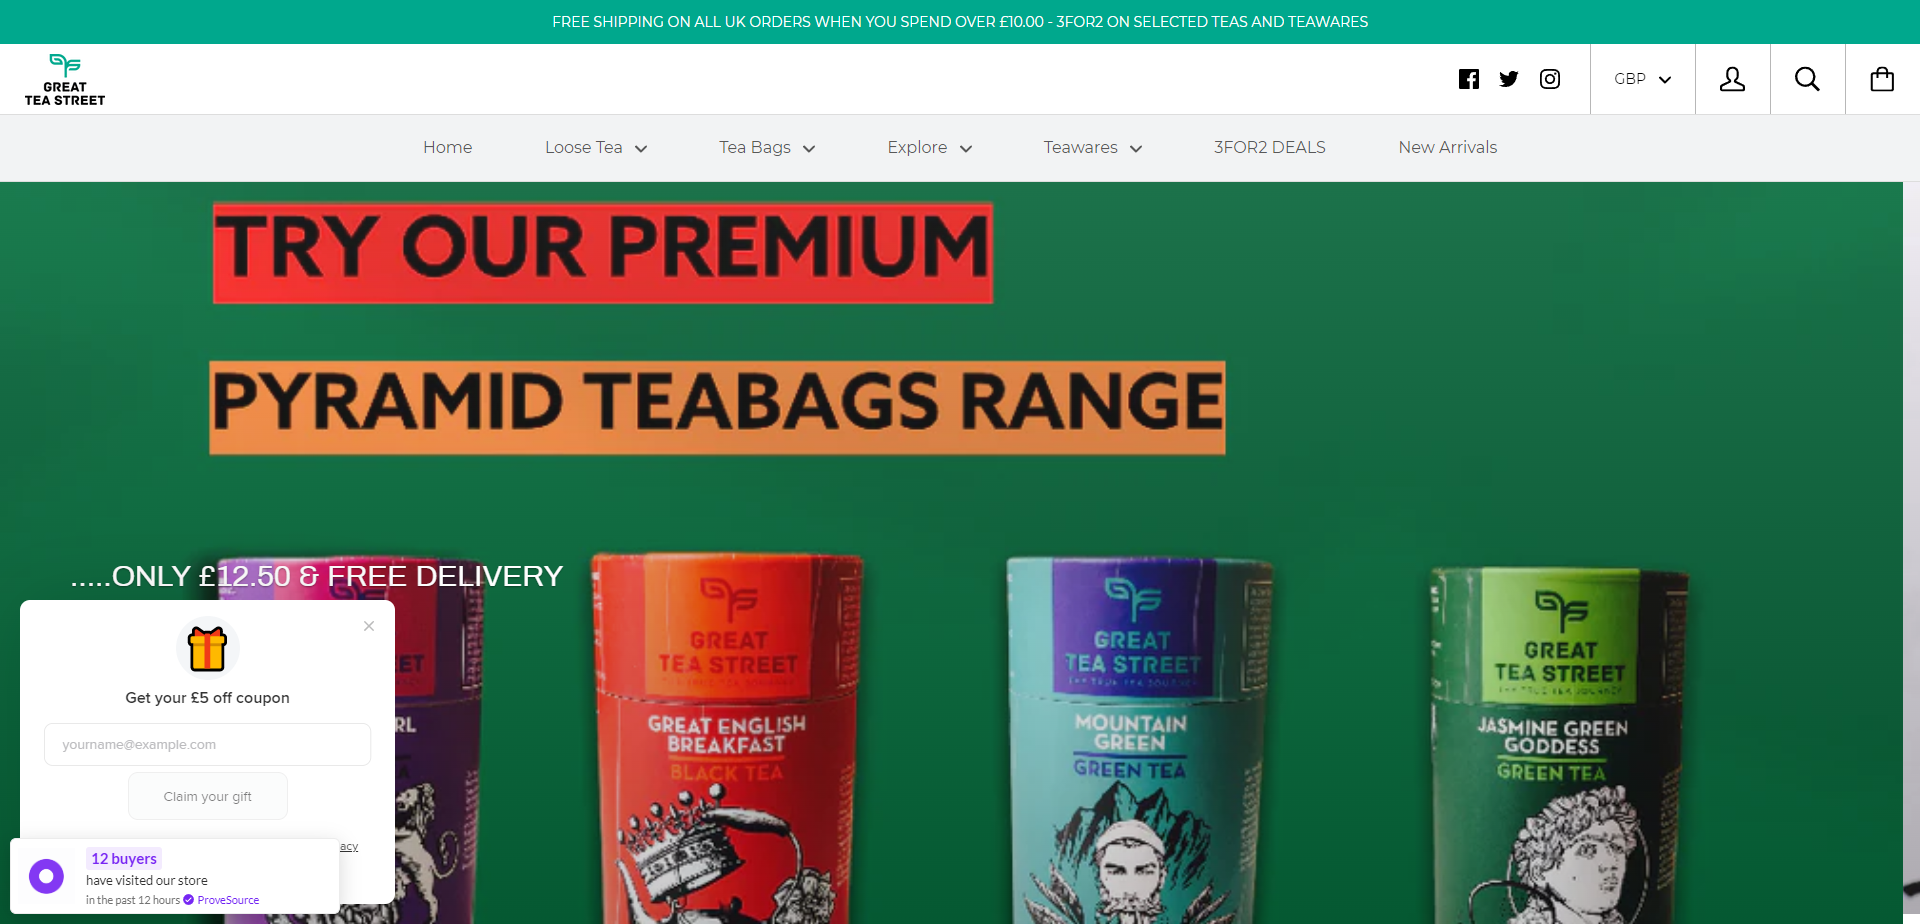 Referral Landing Page for Great Tea Street